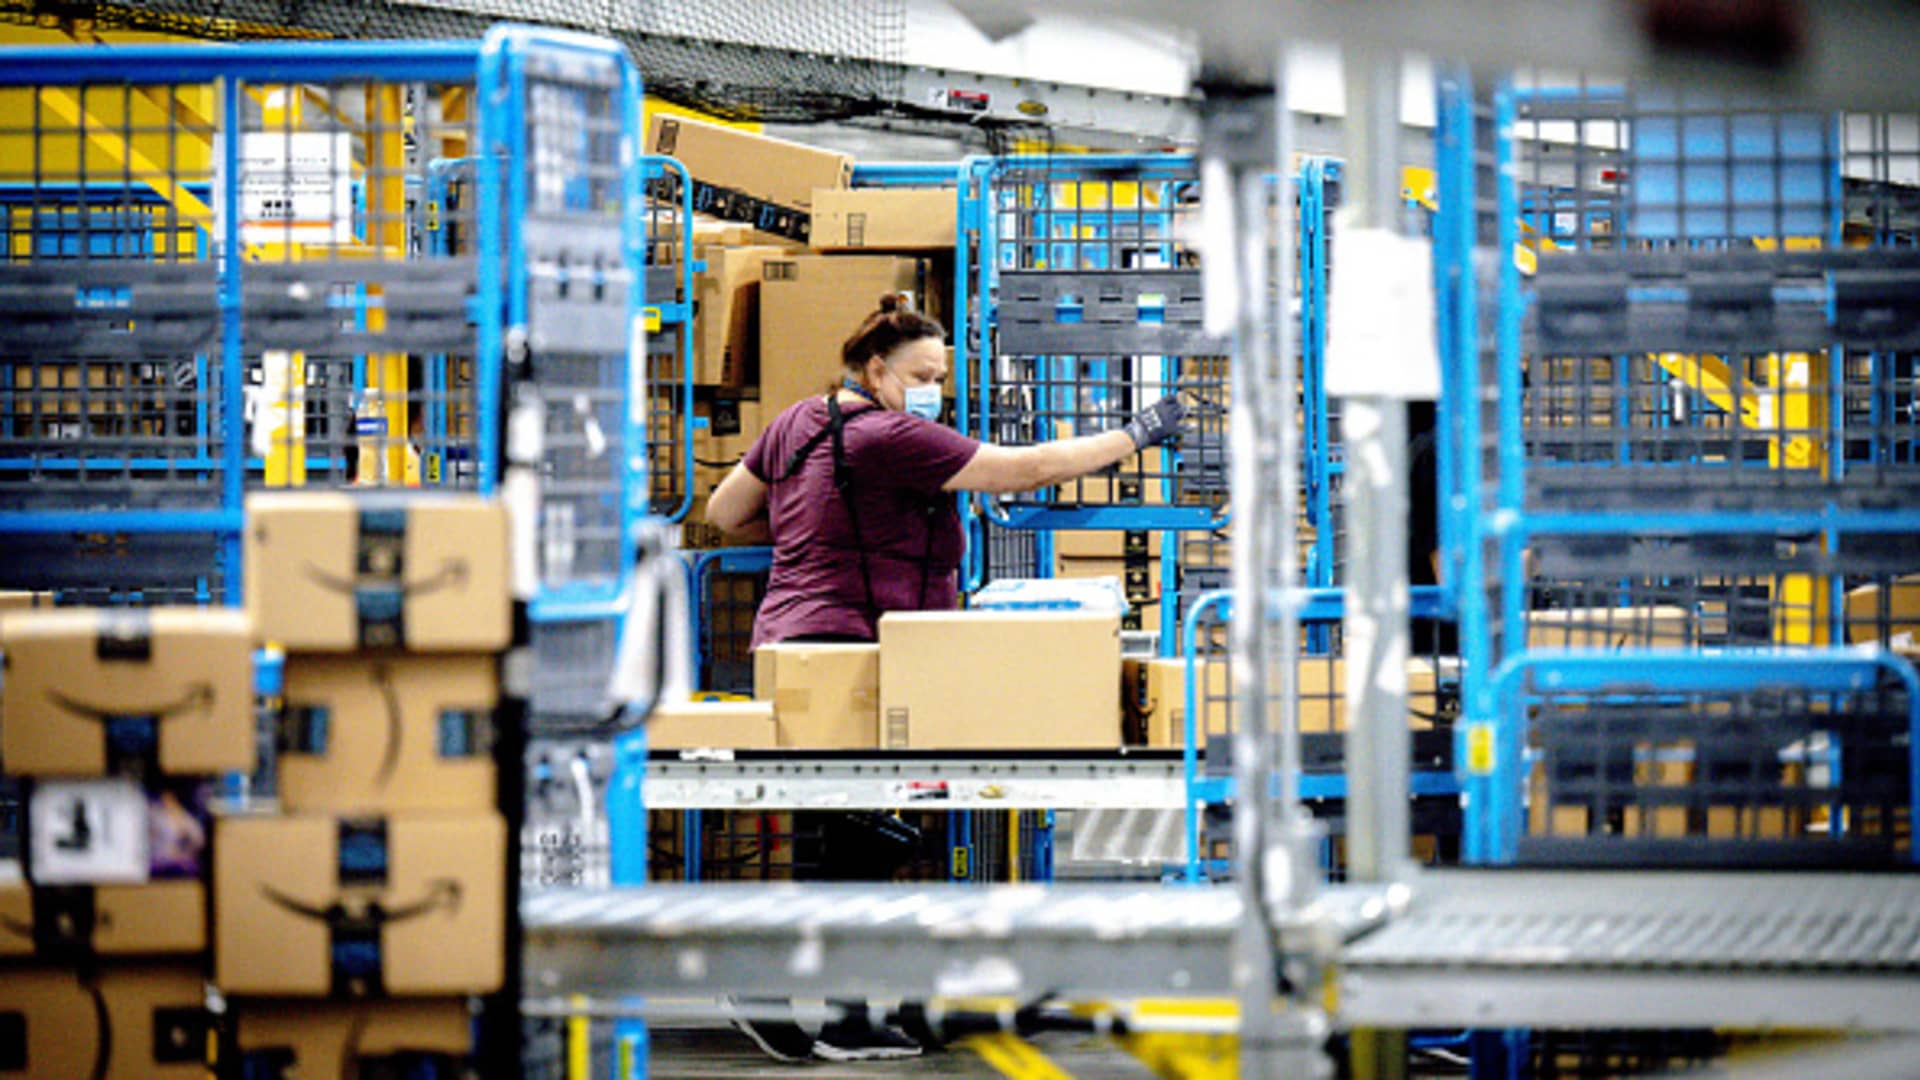 Amazon says more than 300 million items sold during Prime Day